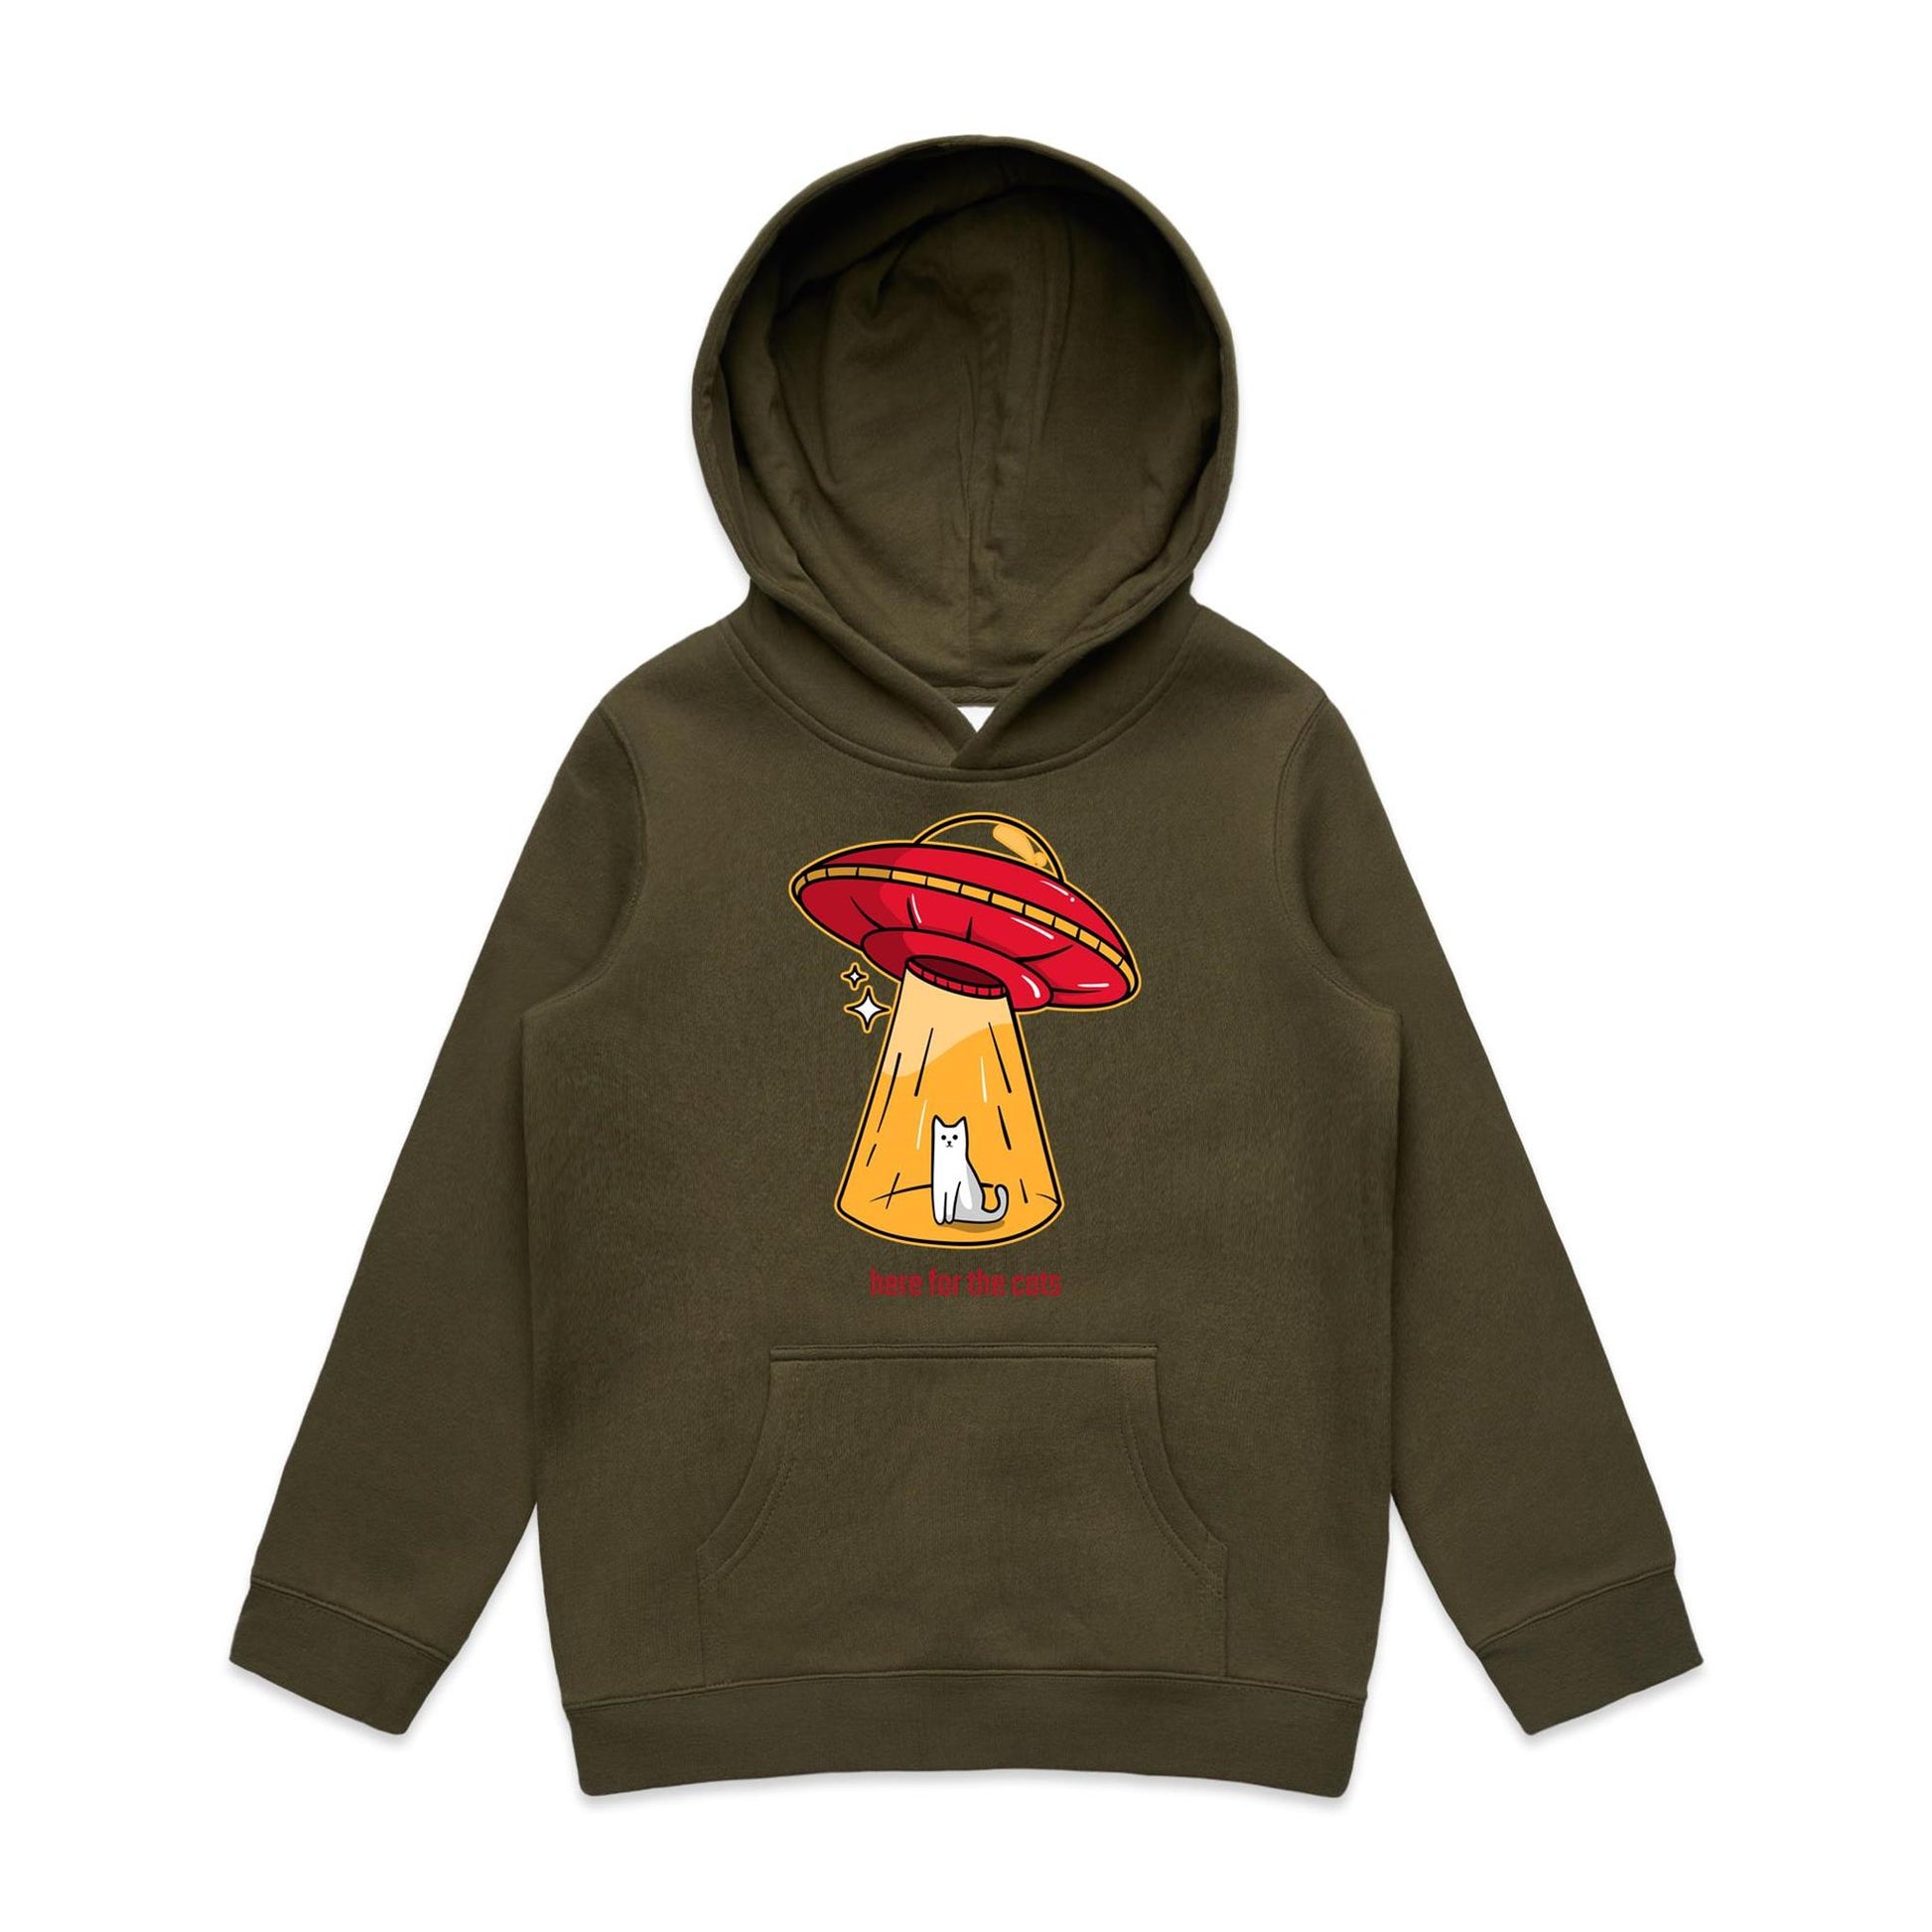 UFO, Here For The Cats - Youth Supply Hood Army Kids Hoodie